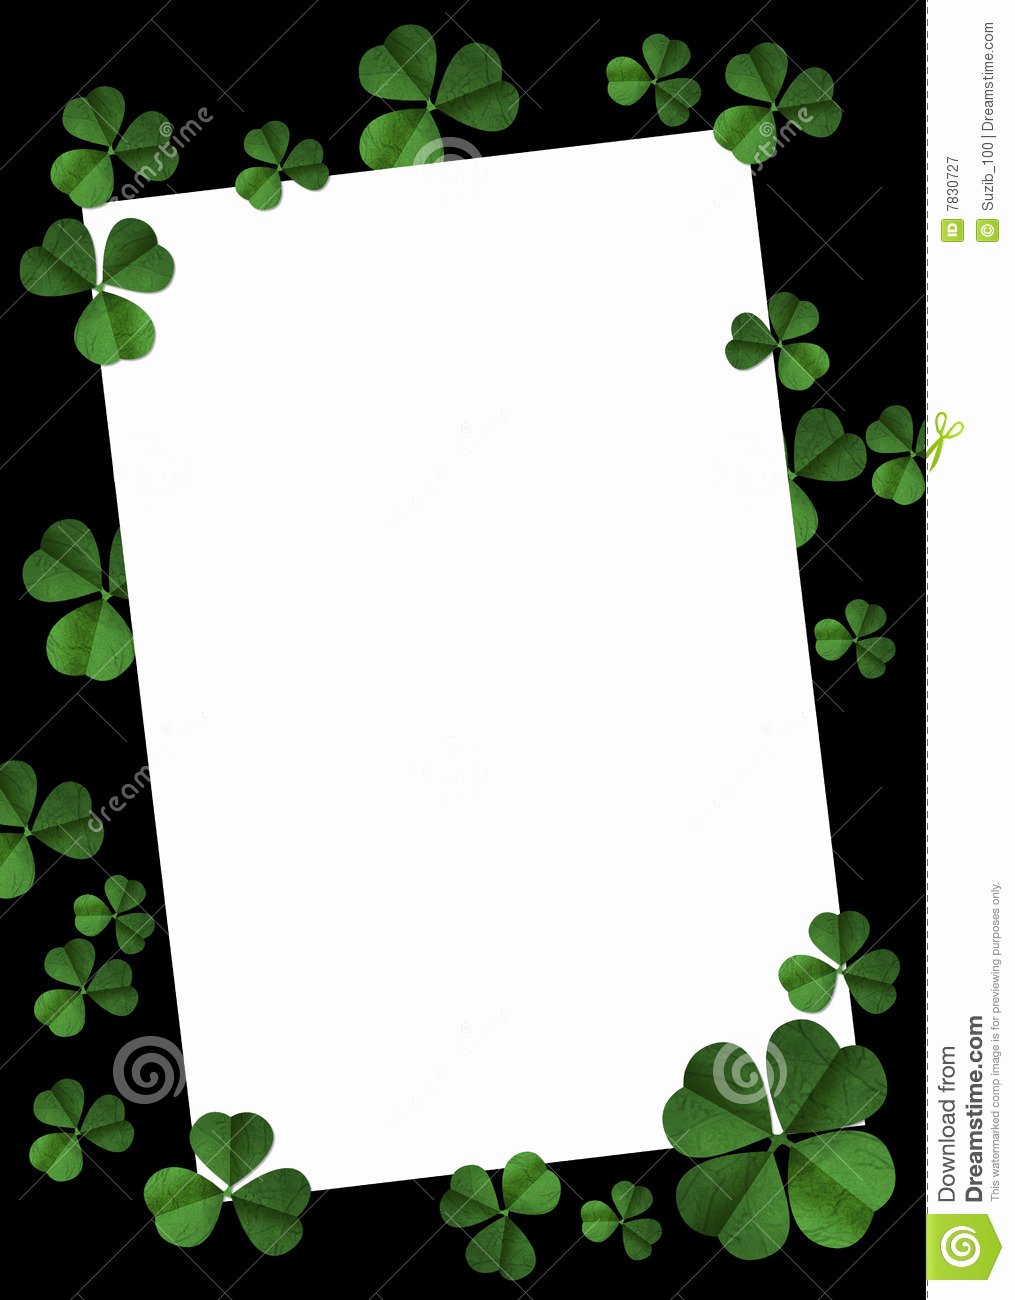 St Patrick Day Posters Unique St Patrick S Day Poster Stock Illustration Illustration